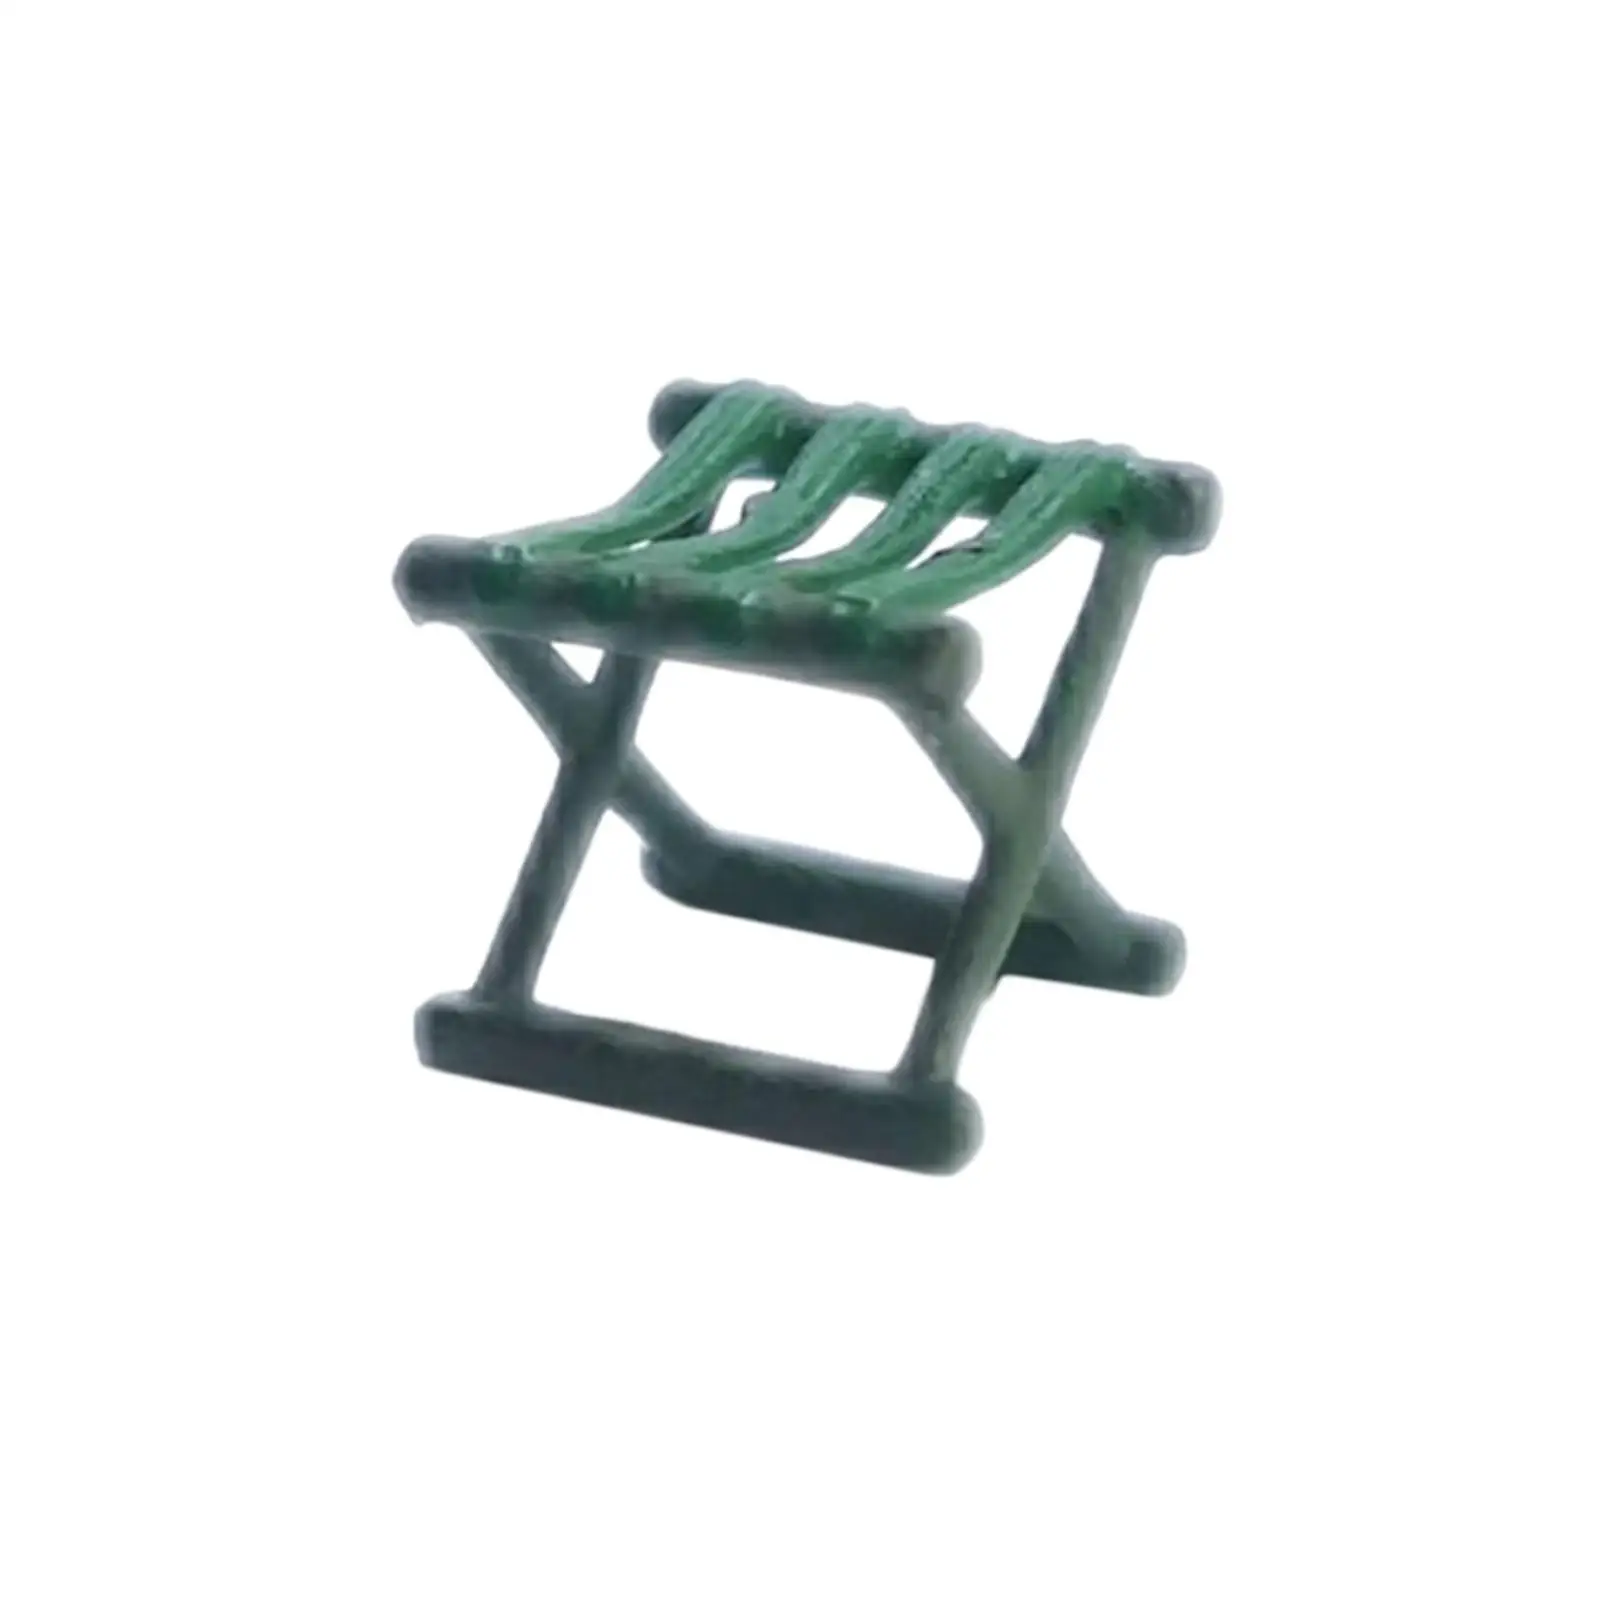 1:64 Scale Tiny Folding Stool Layout Decoration Micro Landscape S Gauge Trains Architectural Diorama Scenery